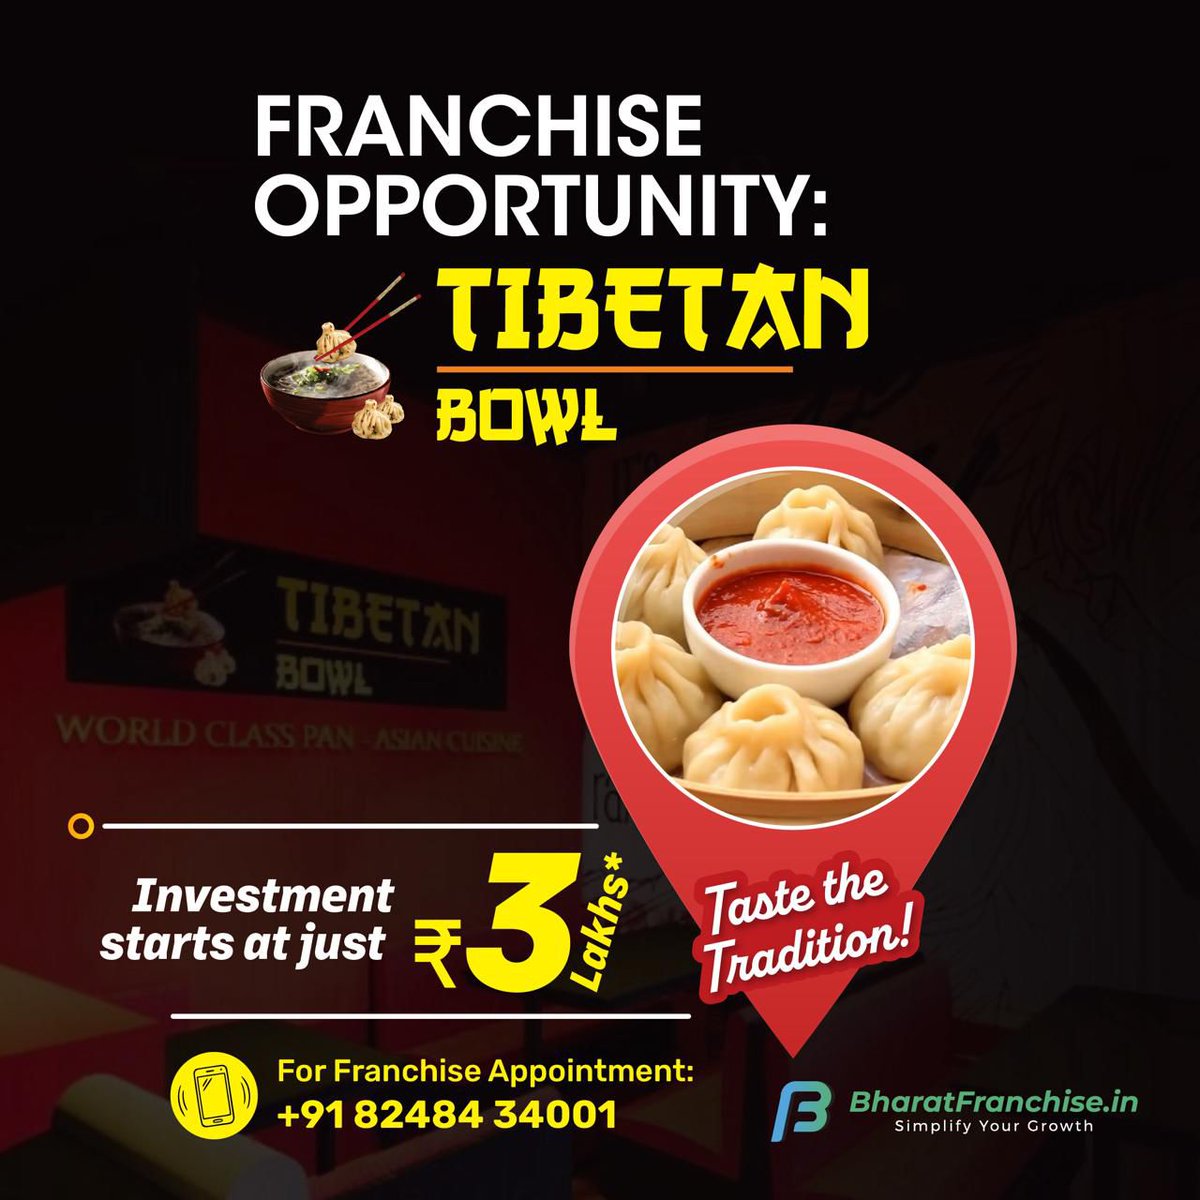 Tibetan Bowl Food Franchise opportunity, where authentic flavors meet entrepreneurial dreams! With an investment of just Rs 3 Lakhs, reach out today and let's dish out success together! Call us at 8248434001.
#TibetanBowlFood #FranchiseOpportunity #InvestInFlavor